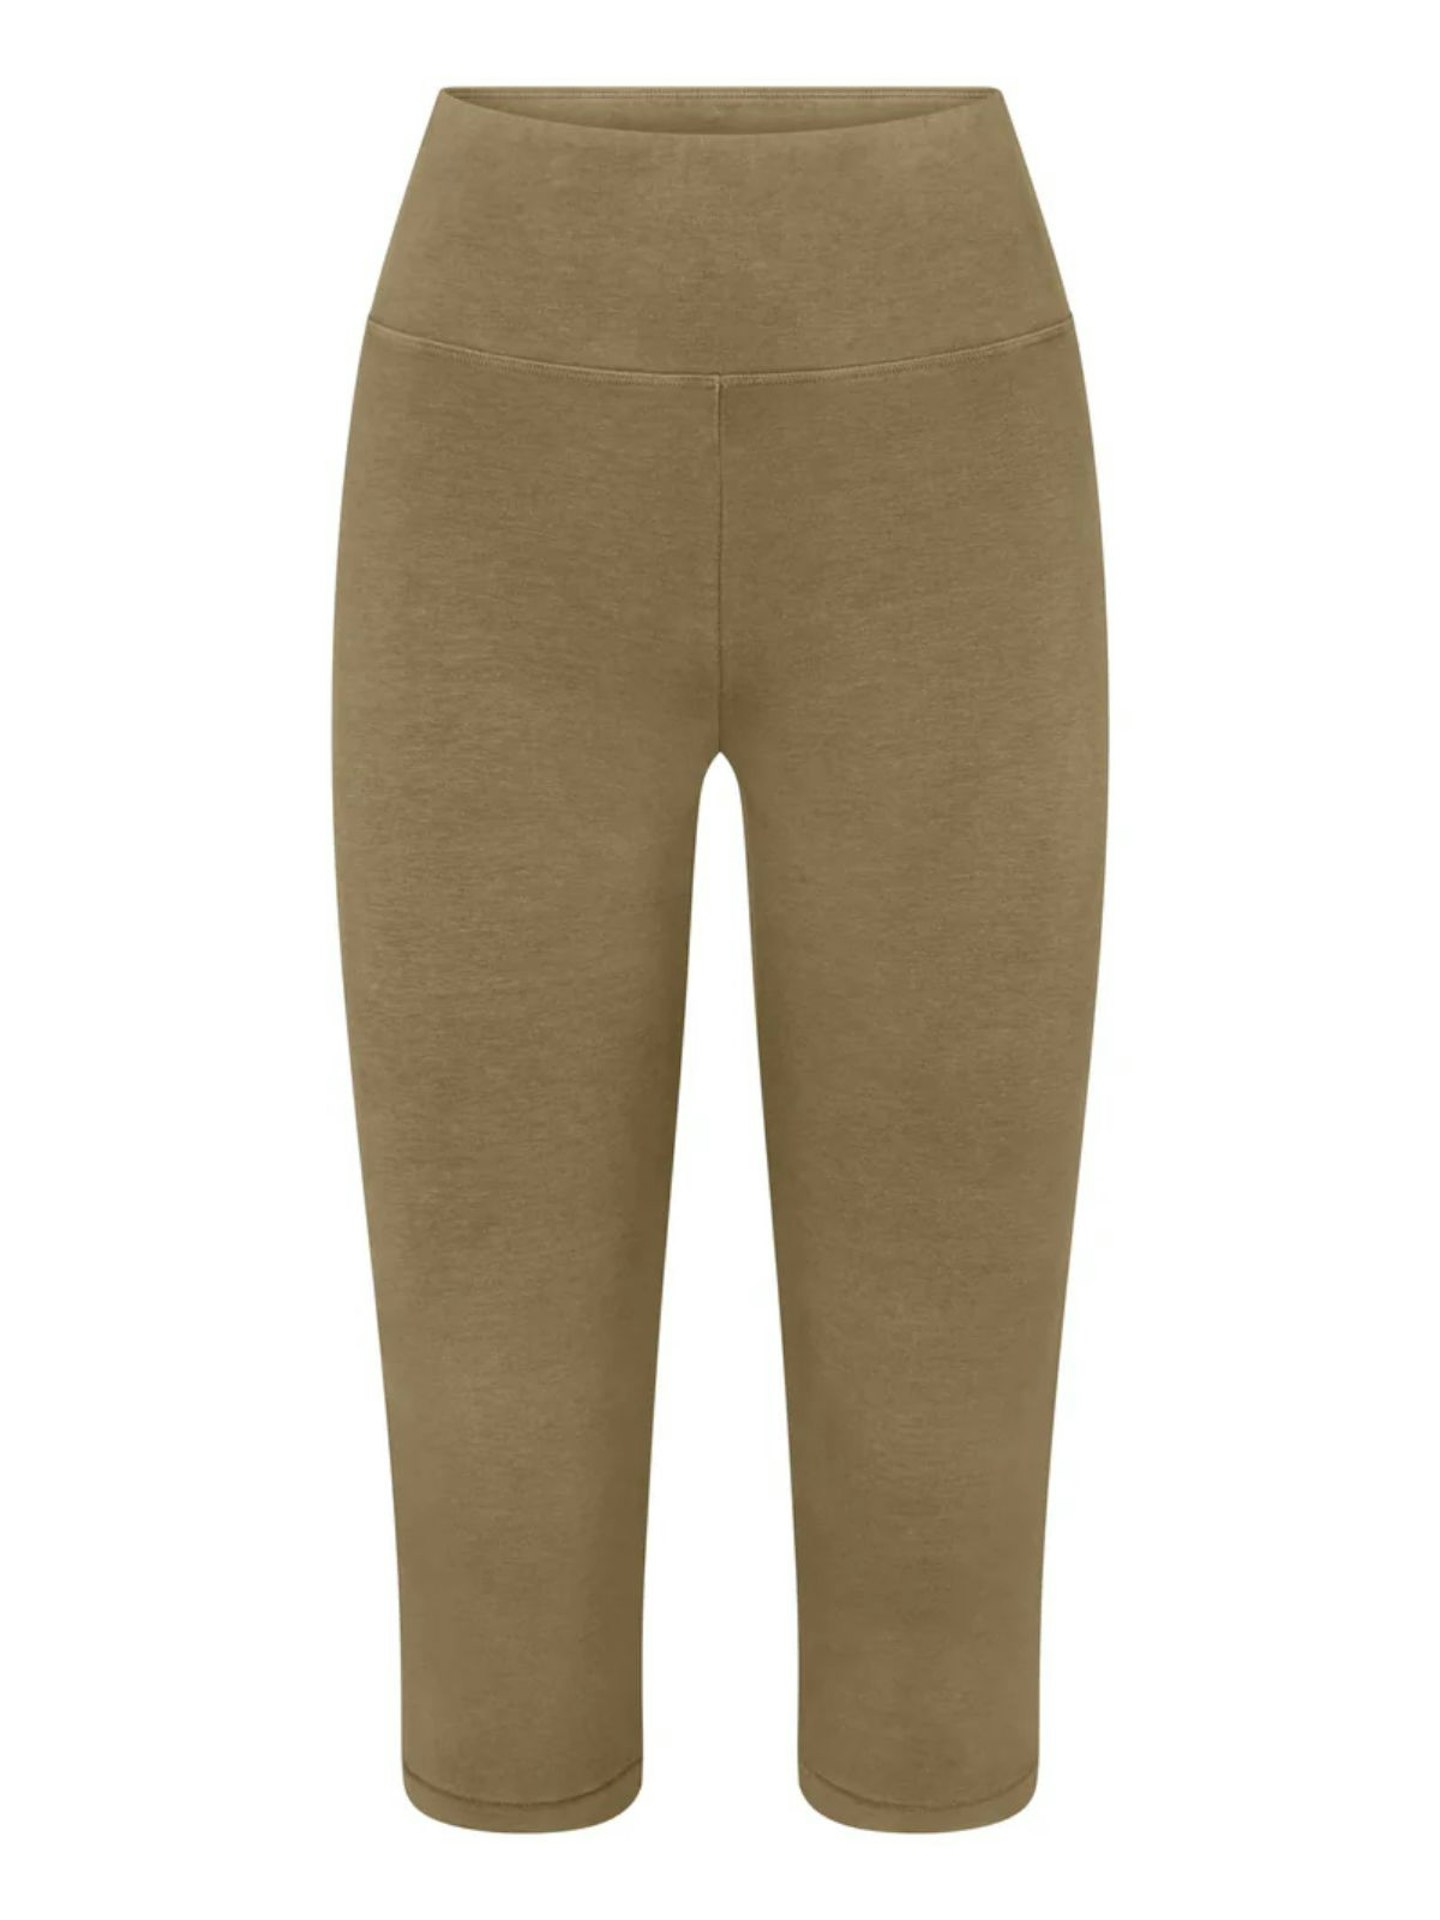 Outdoor Cropped Legging